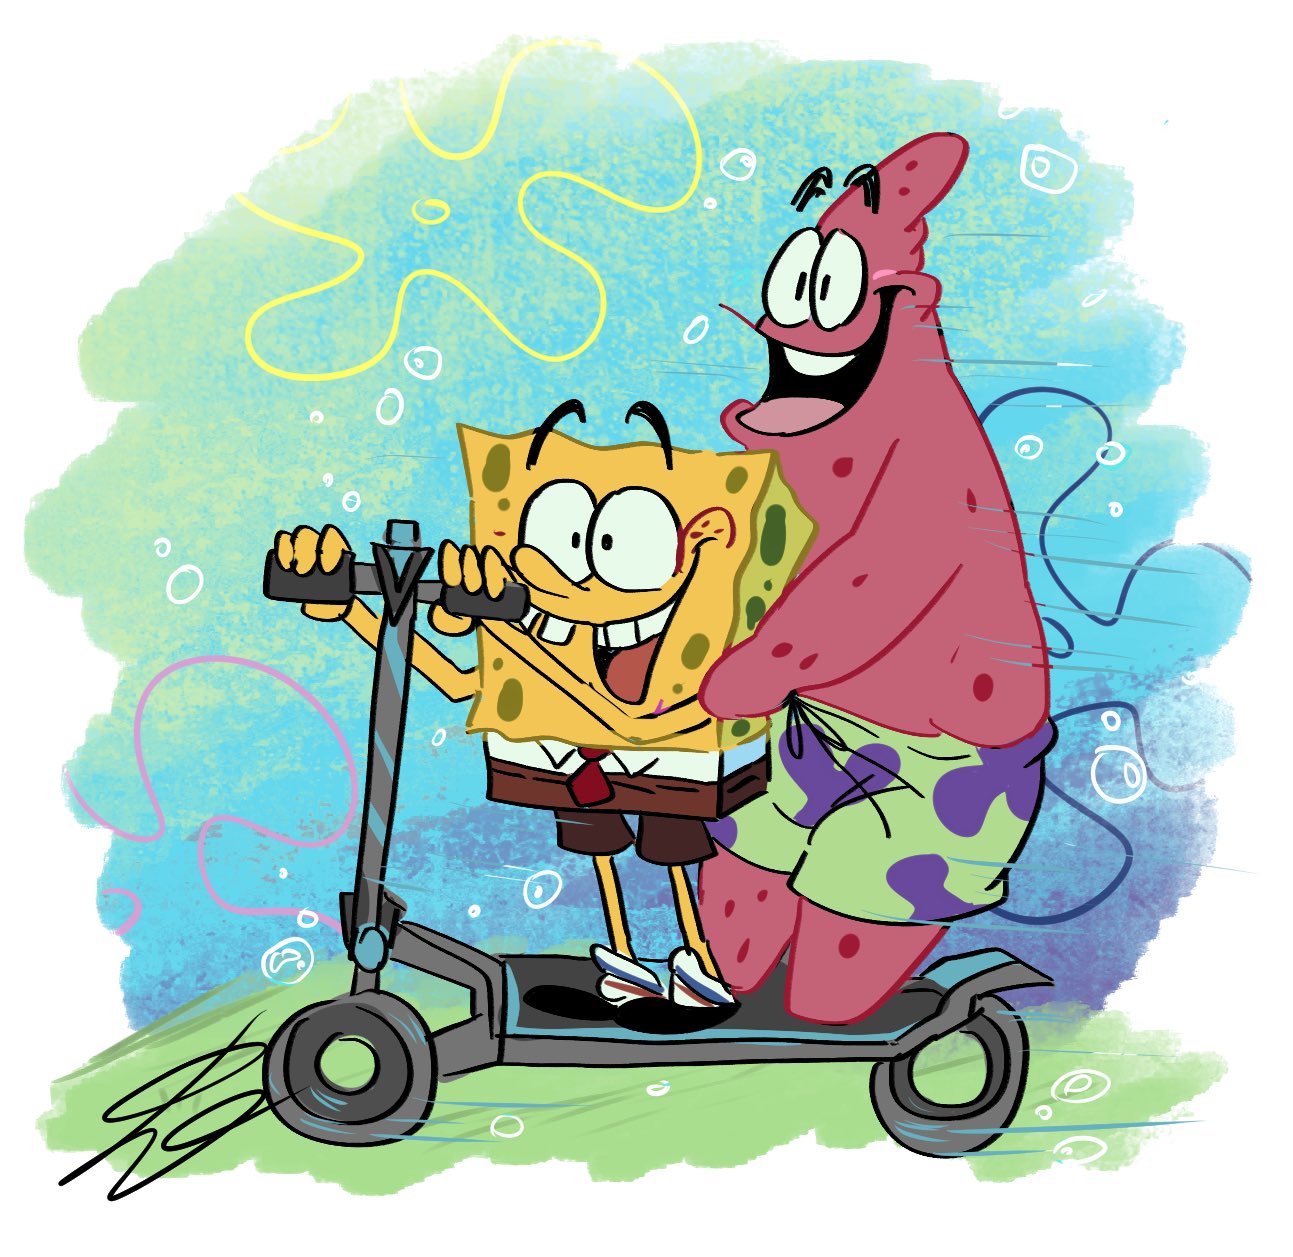 🩷ℂ𝕣𝕚𝕞𝕞𝕪🌱🦊🐢🧽🫧 on Twitter: "Patrick:hahahaha! E-scooter so goood!! SpongeBob:me too Patrick! electrically powered, so it's convenient even if you don't have a car!! ………………….And they get trouble. https://t.co/wpcdfFvCCq" / X